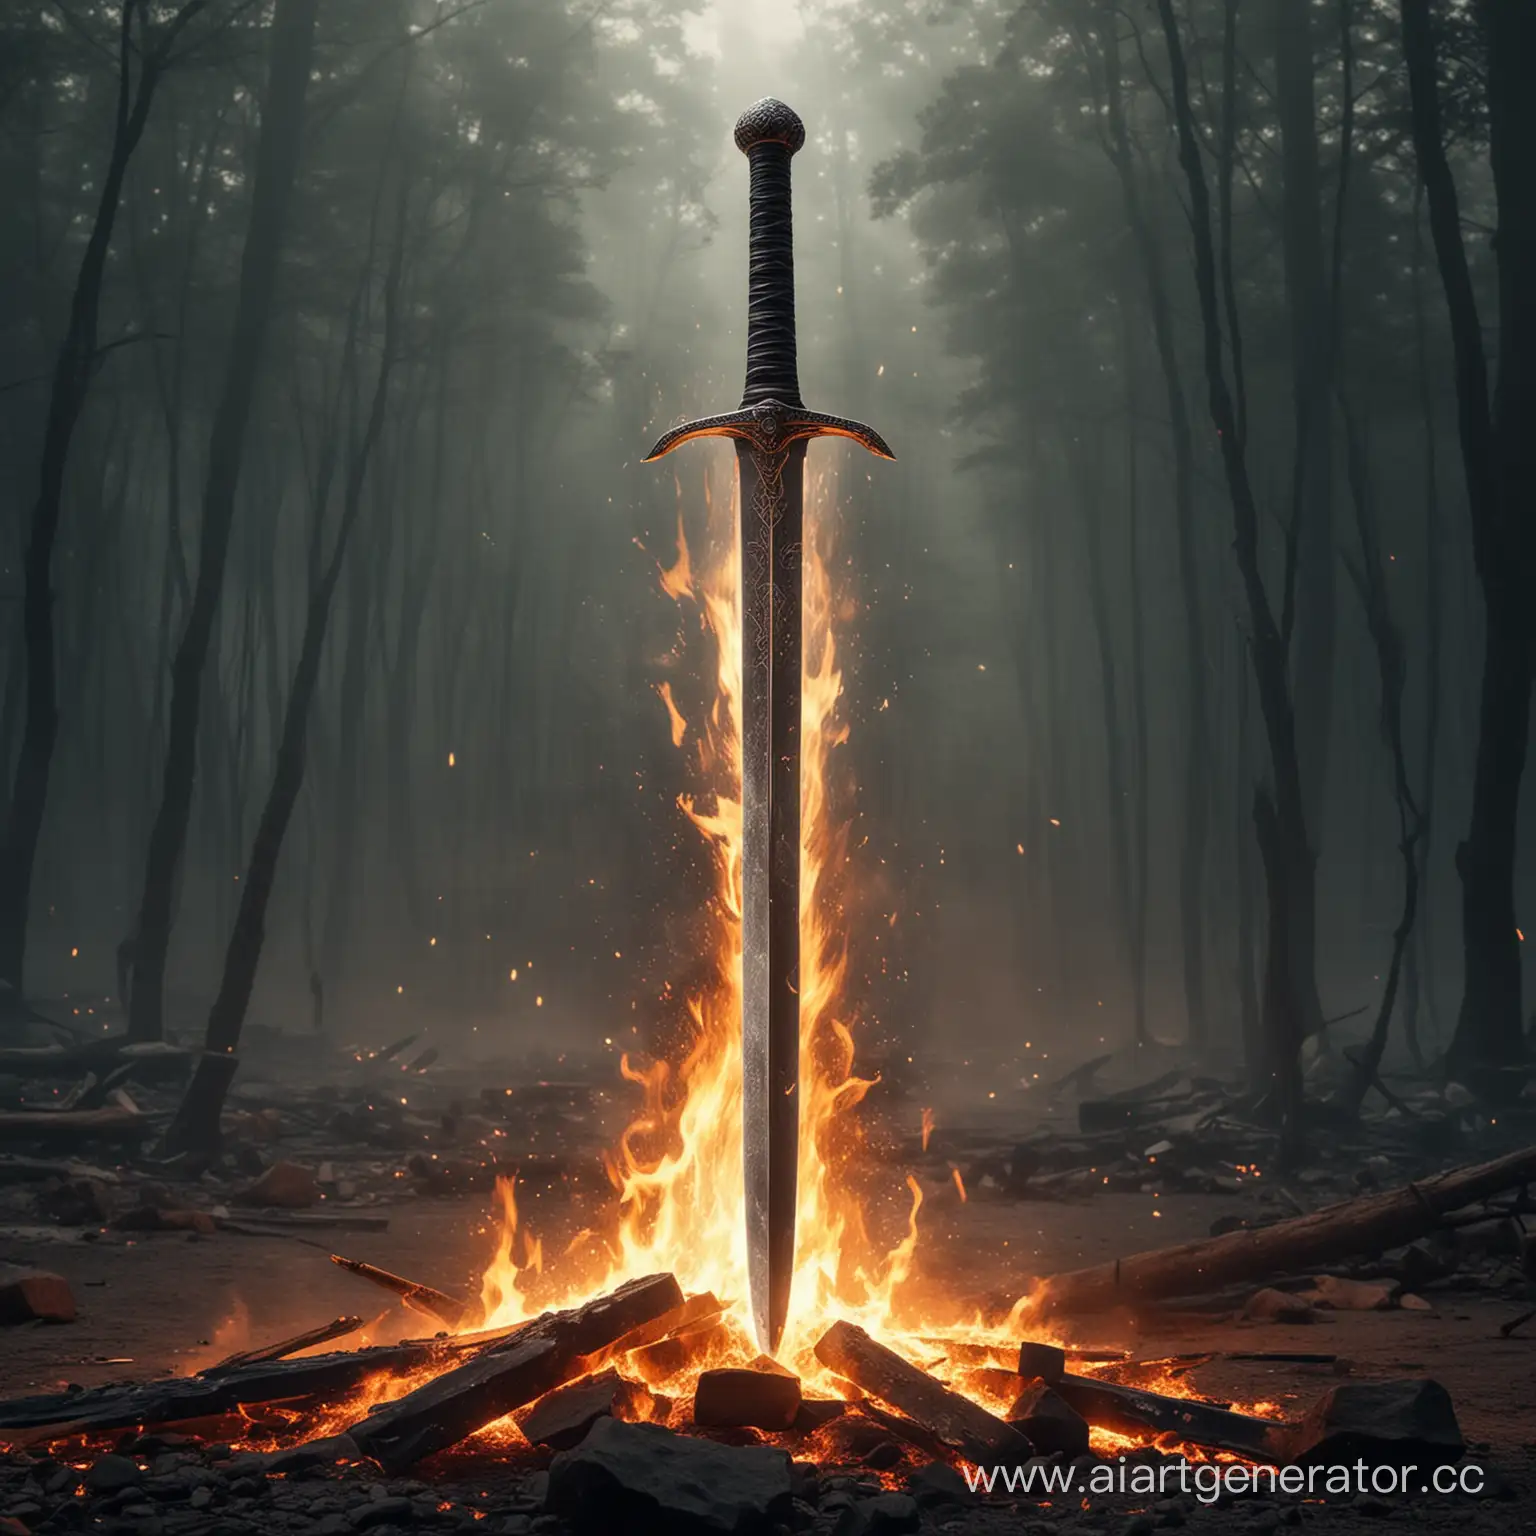 Fiery-Forge-Sword-of-Steel-Emerges